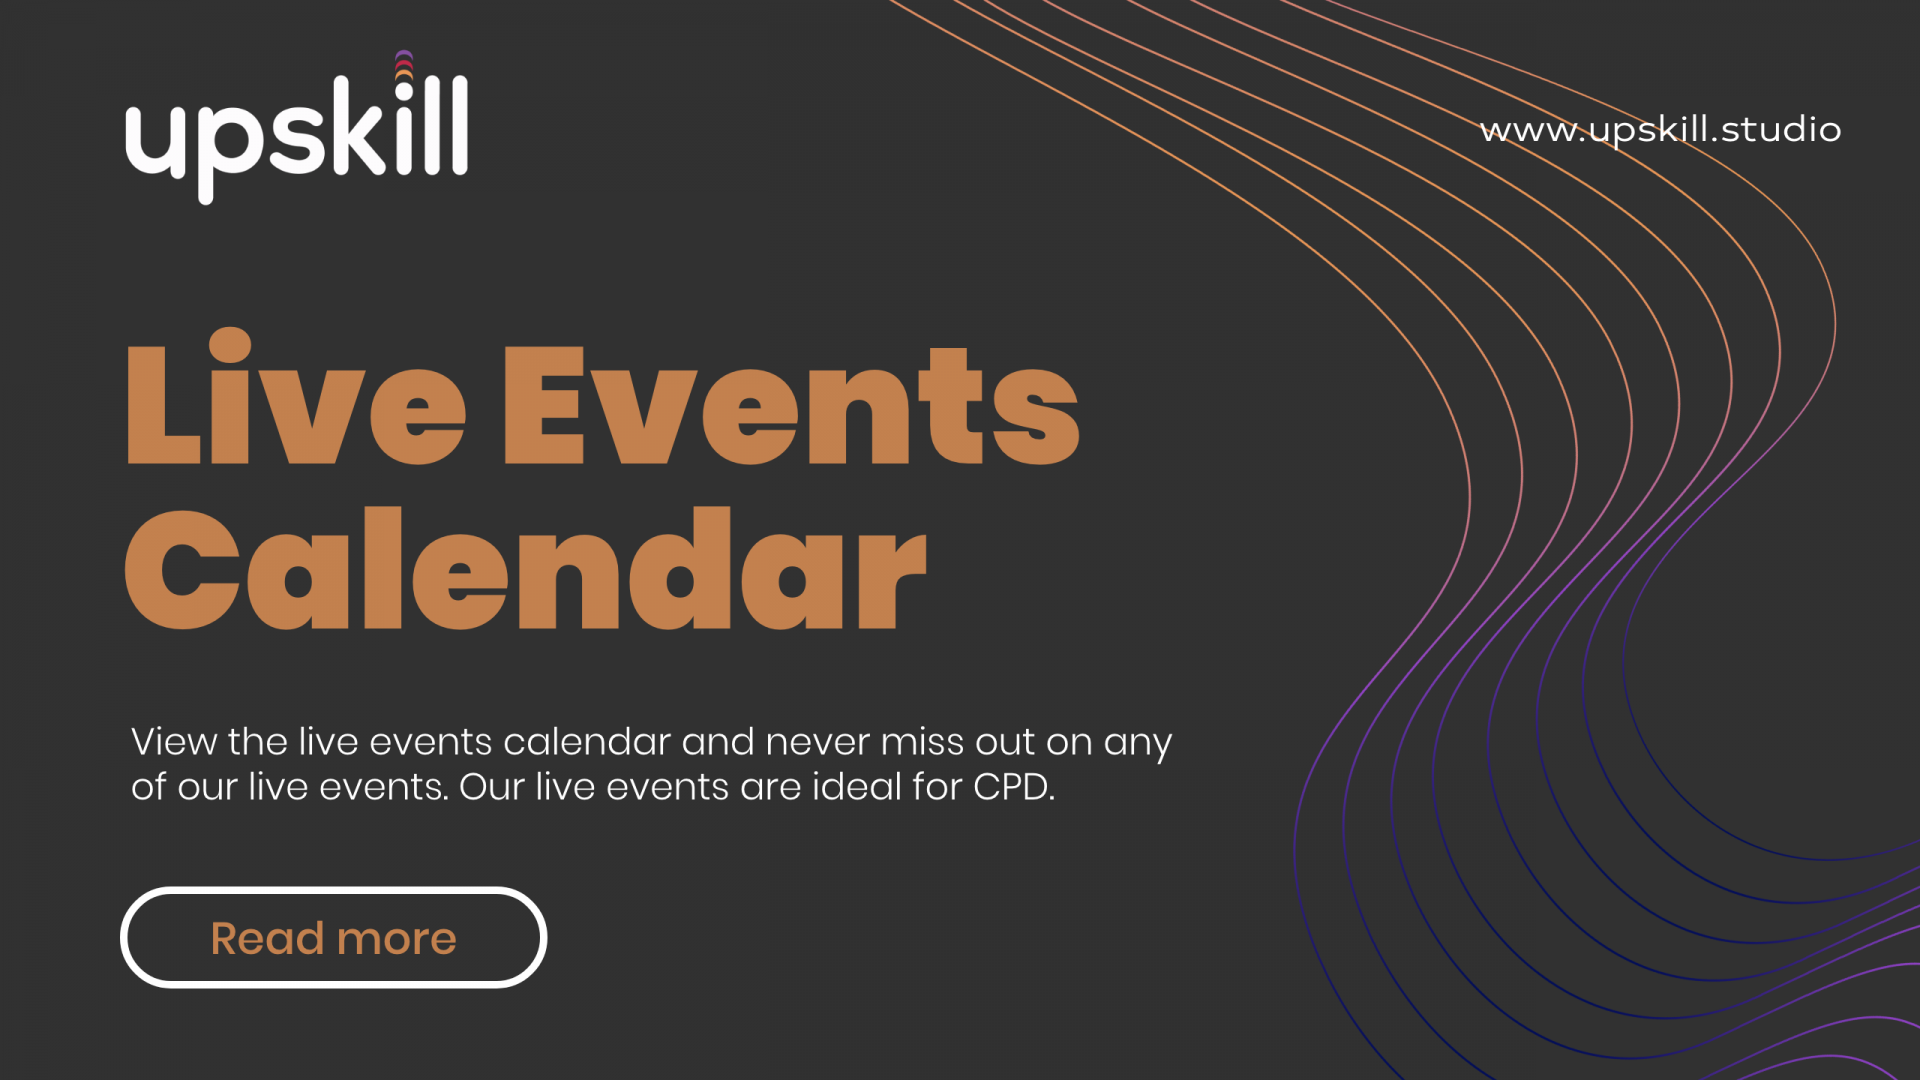 Introducing the Upskill Live Events Calendar